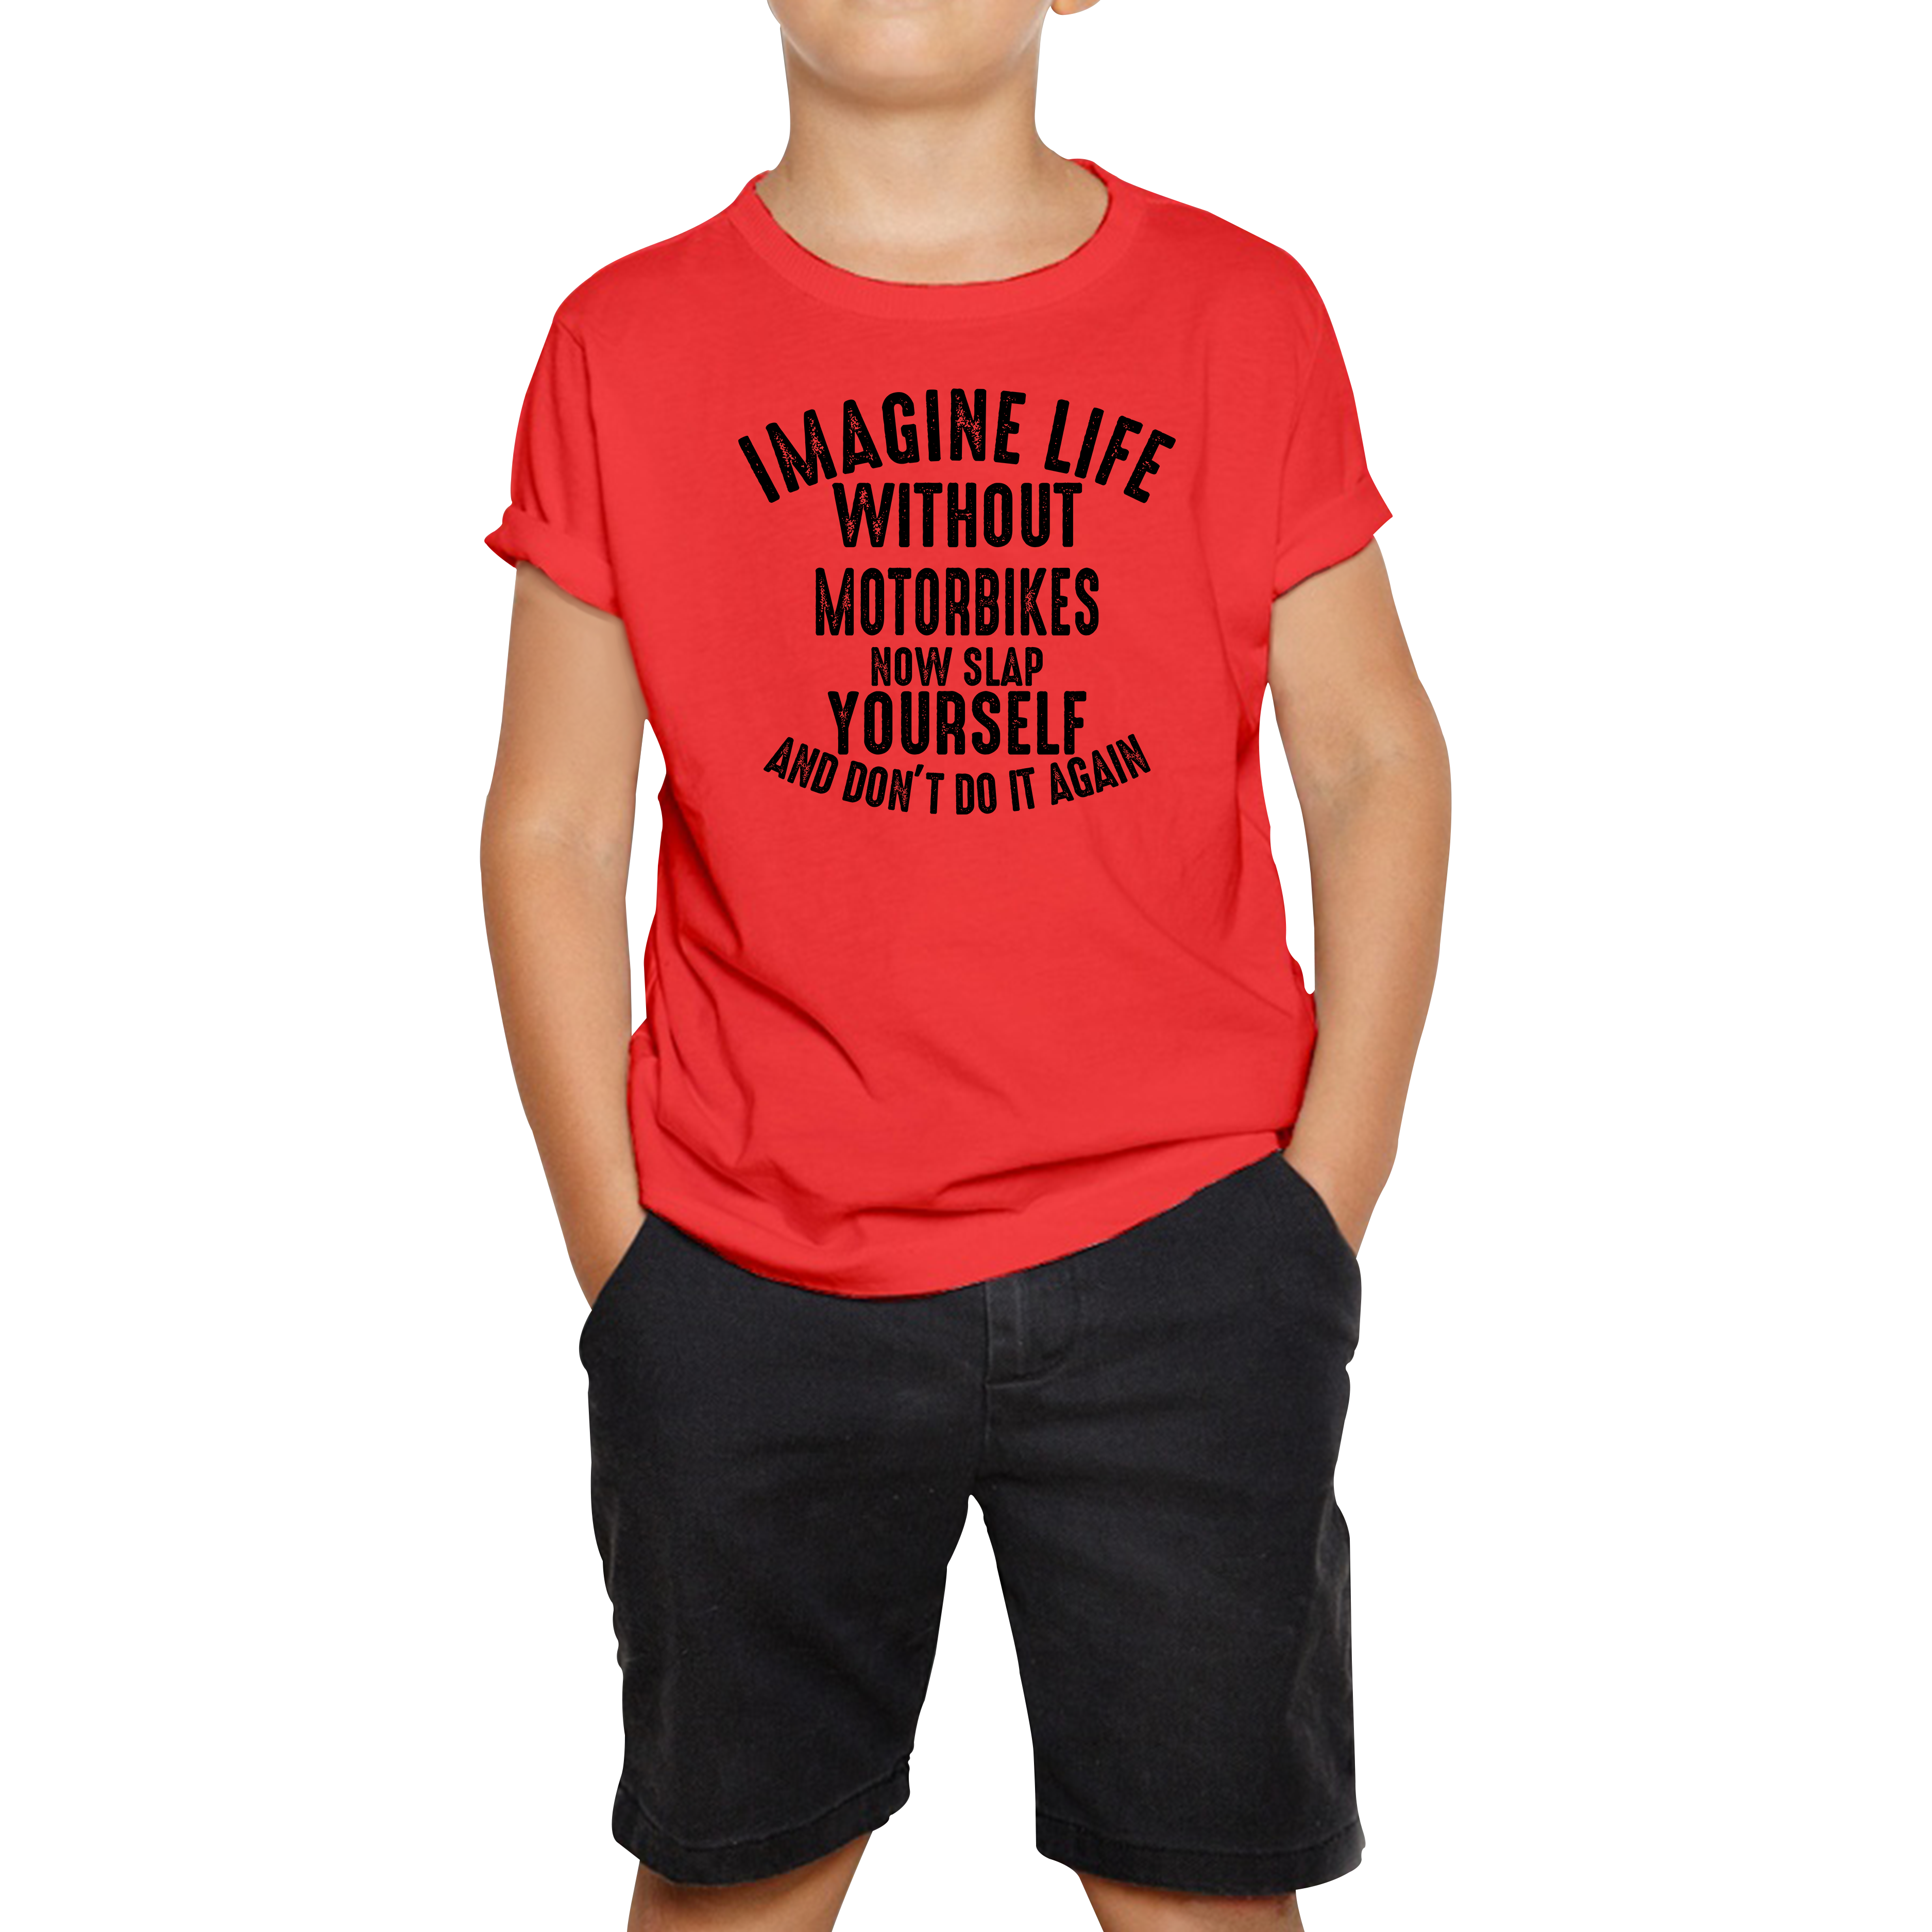 Imagine Life Without Motorbikes Now Slap Yourself And Don' Do It Again T-Shirt Bike Lovers Racers Riders Funny Joke Kids Tee